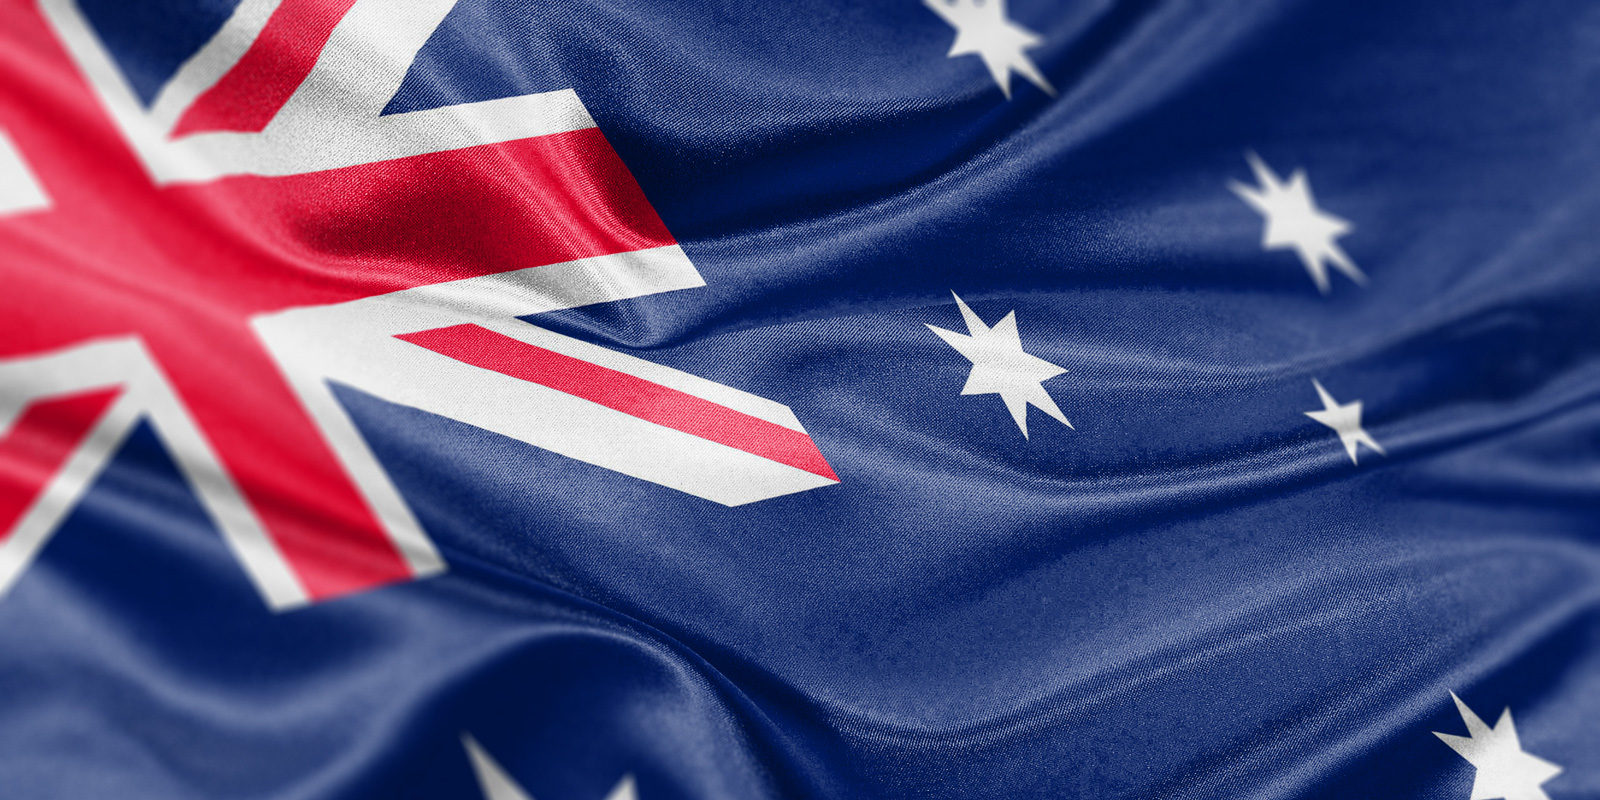 Changes to Australia's Media Ownership Regime Pave Way for Mergers and Acquisitions